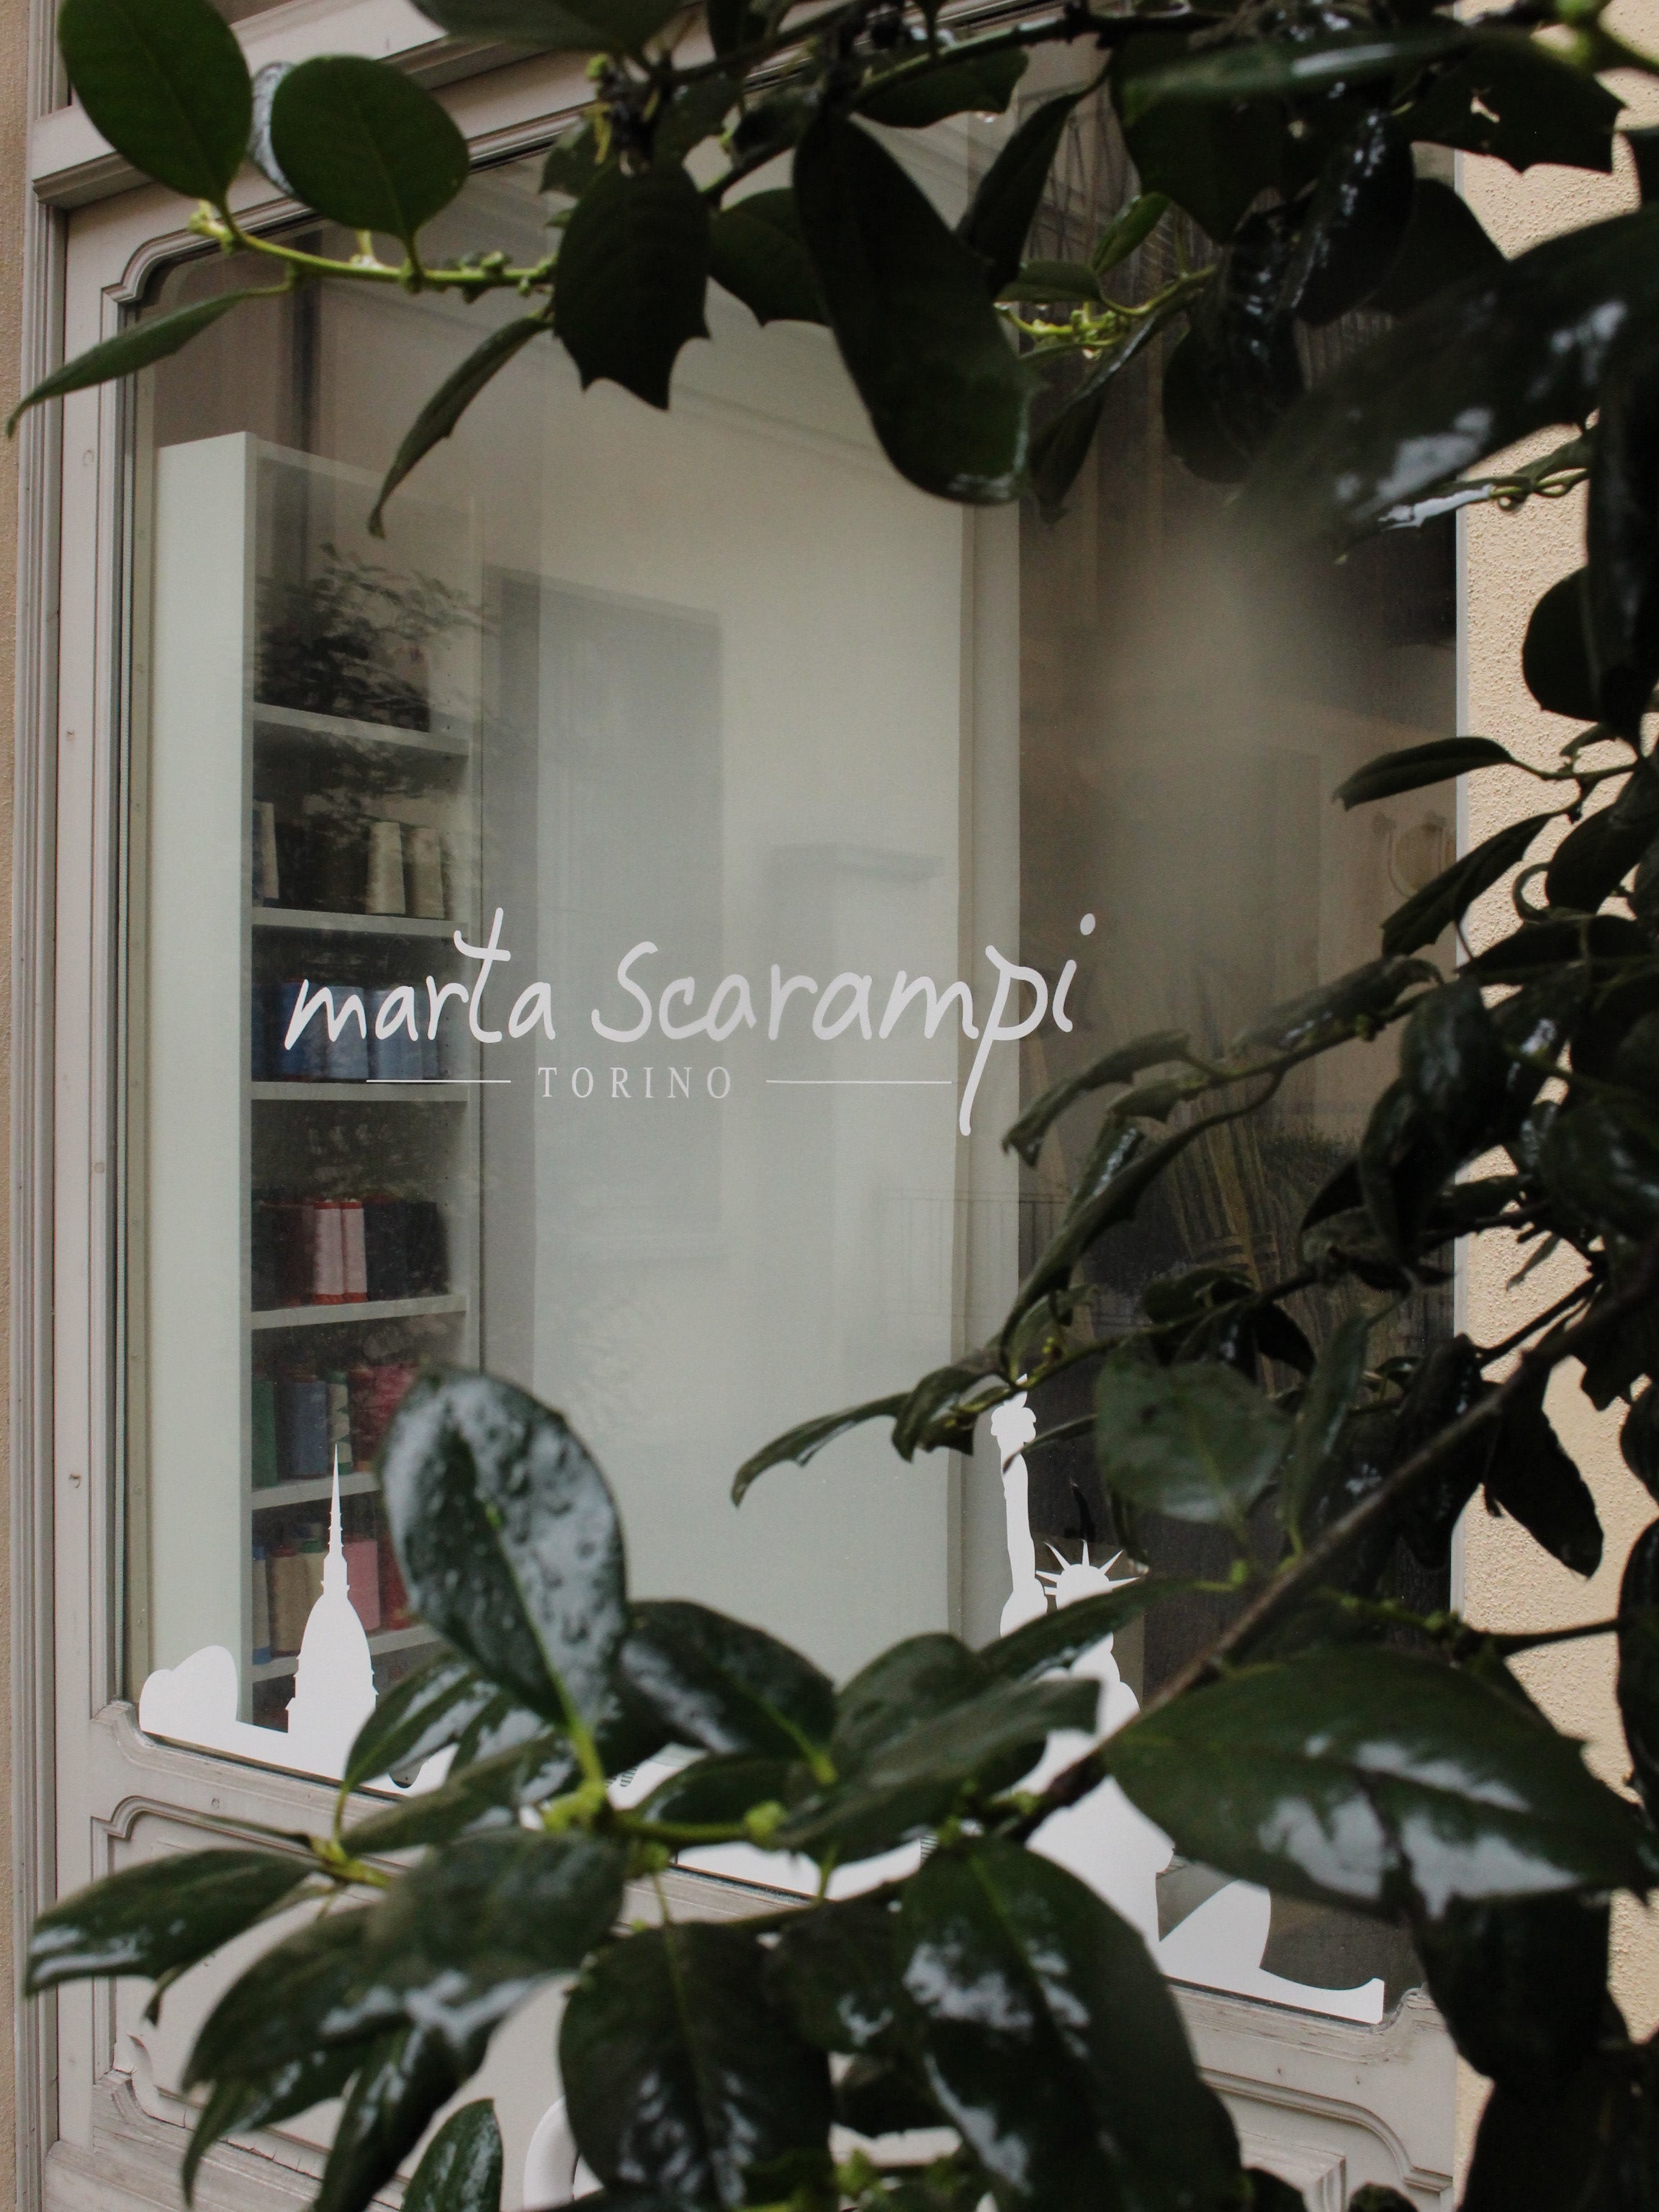 A detail of the window of the Marta Scarampi atelier. 